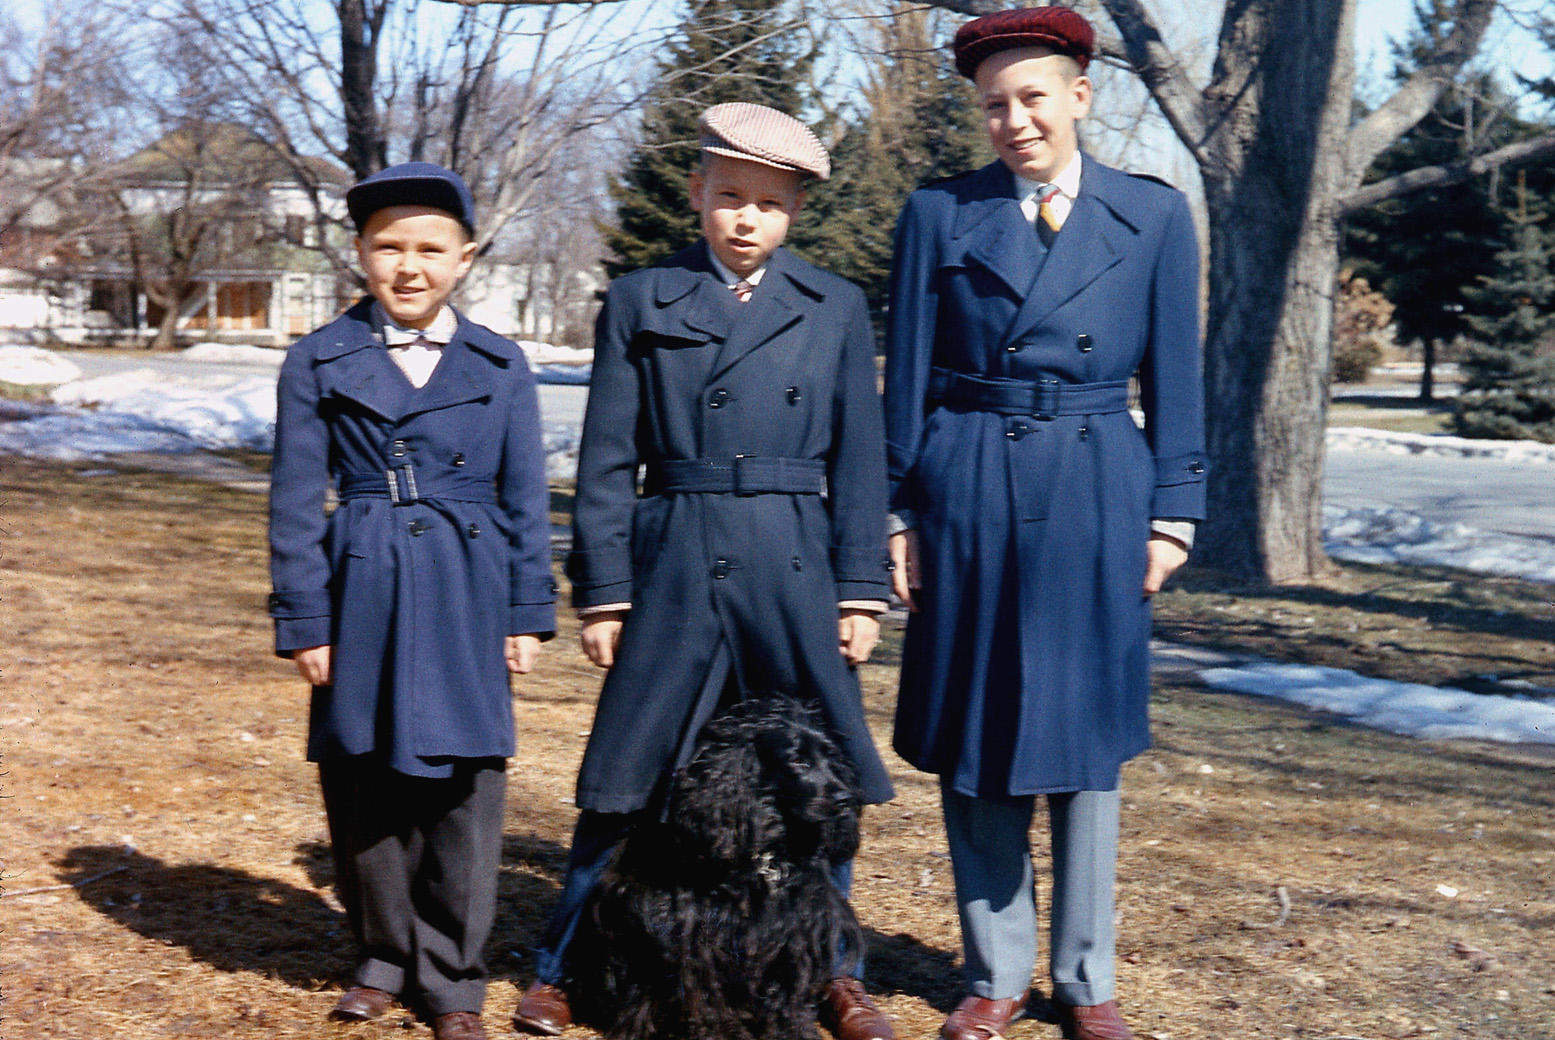 For some reason, "car coats" were popular in the late 1950s (maybe a throwback to the early auto age?), and here is an excruciating shot of me and brothers prior to a road trip. As usual, my next-oldest brother is hamming it up for Dad. View full size.